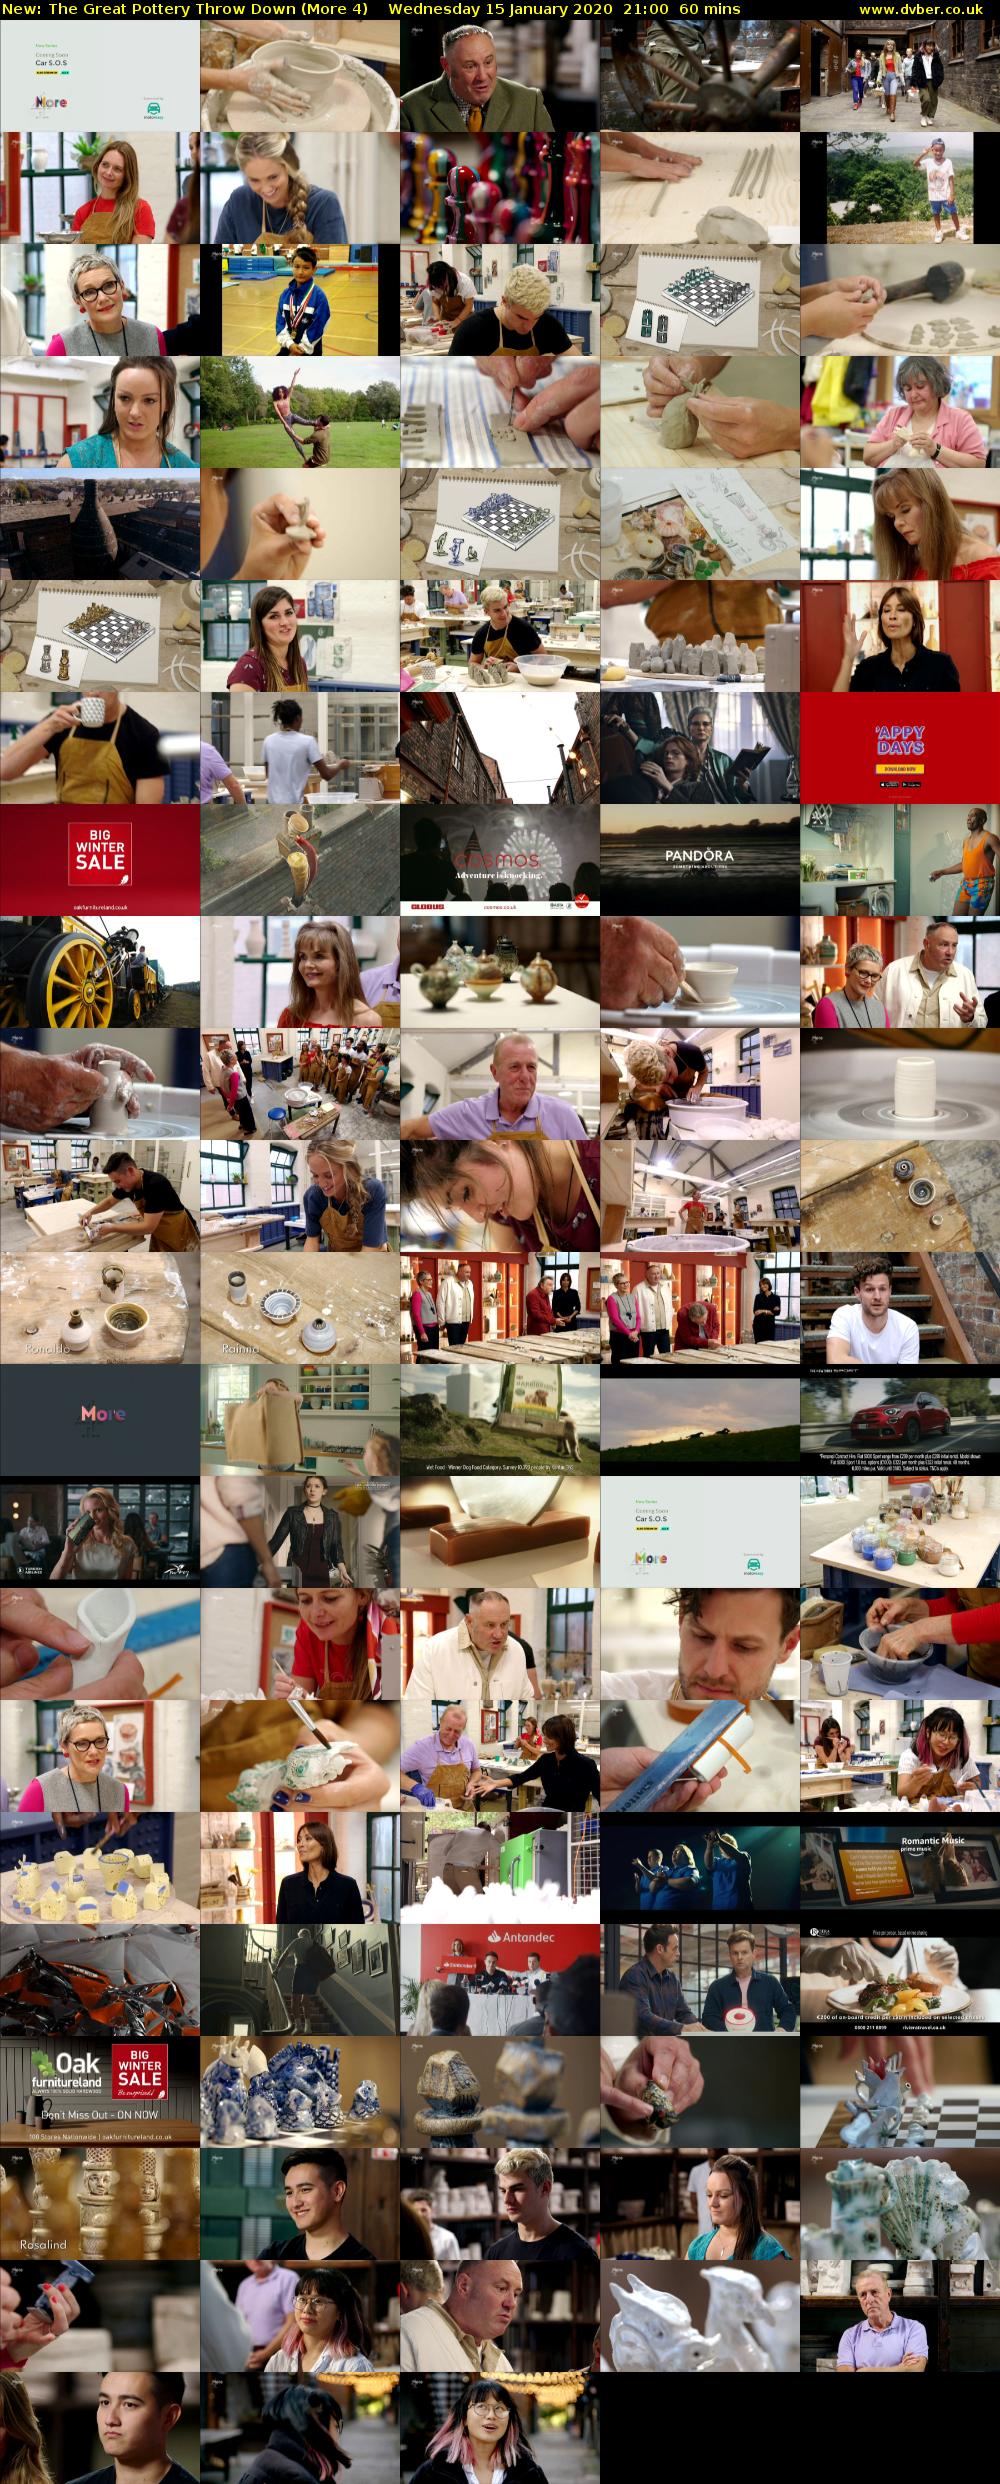 The Great Pottery Throw Down (More 4) Wednesday 15 January 2020 21:00 - 22:00